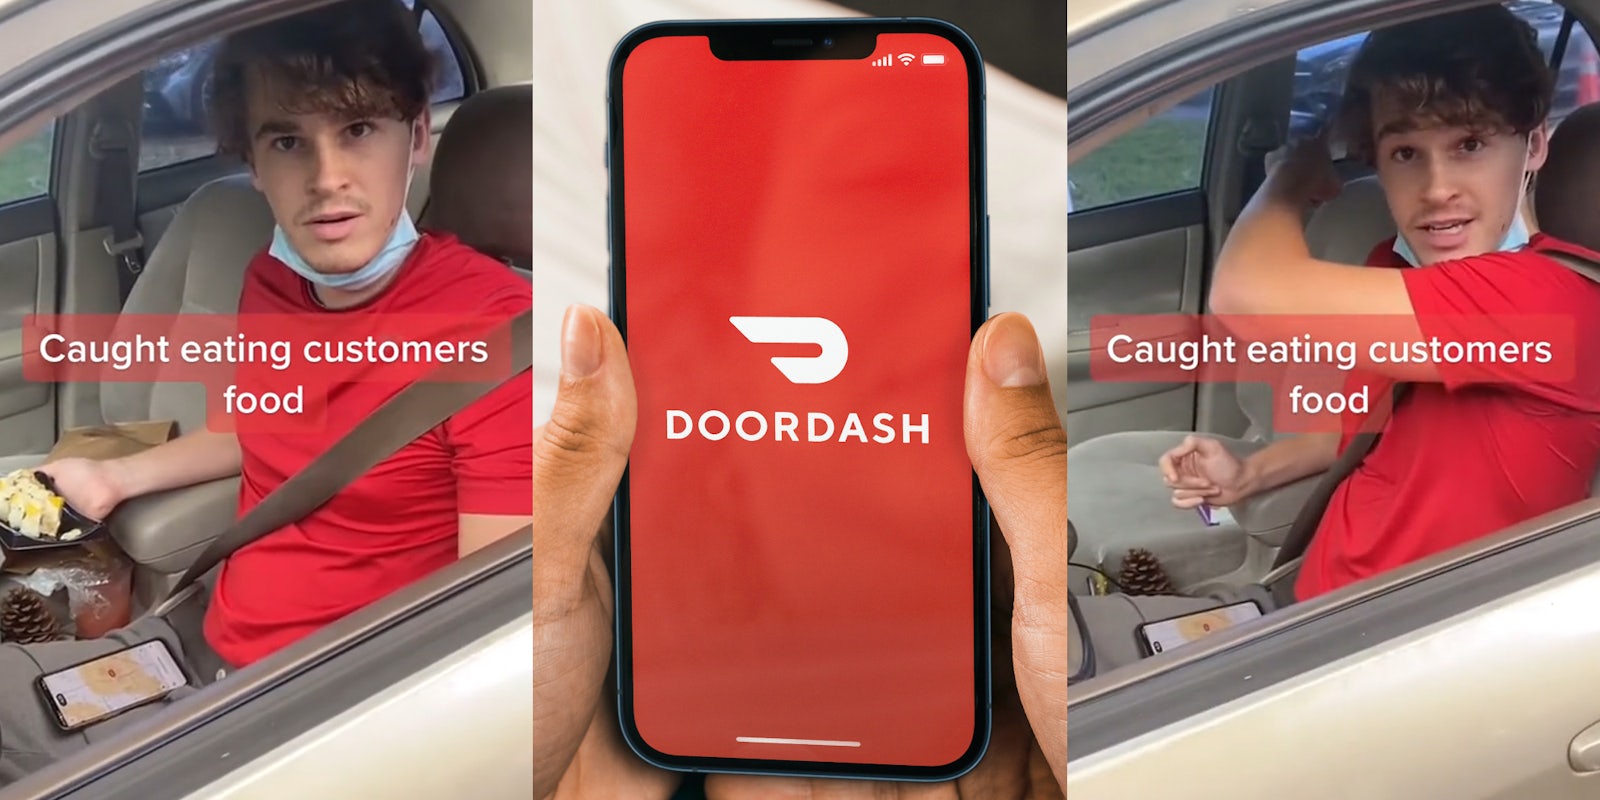 DoorDash driver eating customer food in car with caption 'Caught eating customers food' (l) hands holding phone with DoorDash on screen (c) DoorDash driver speaking in car with caption 'Caught eating customers food' (r)